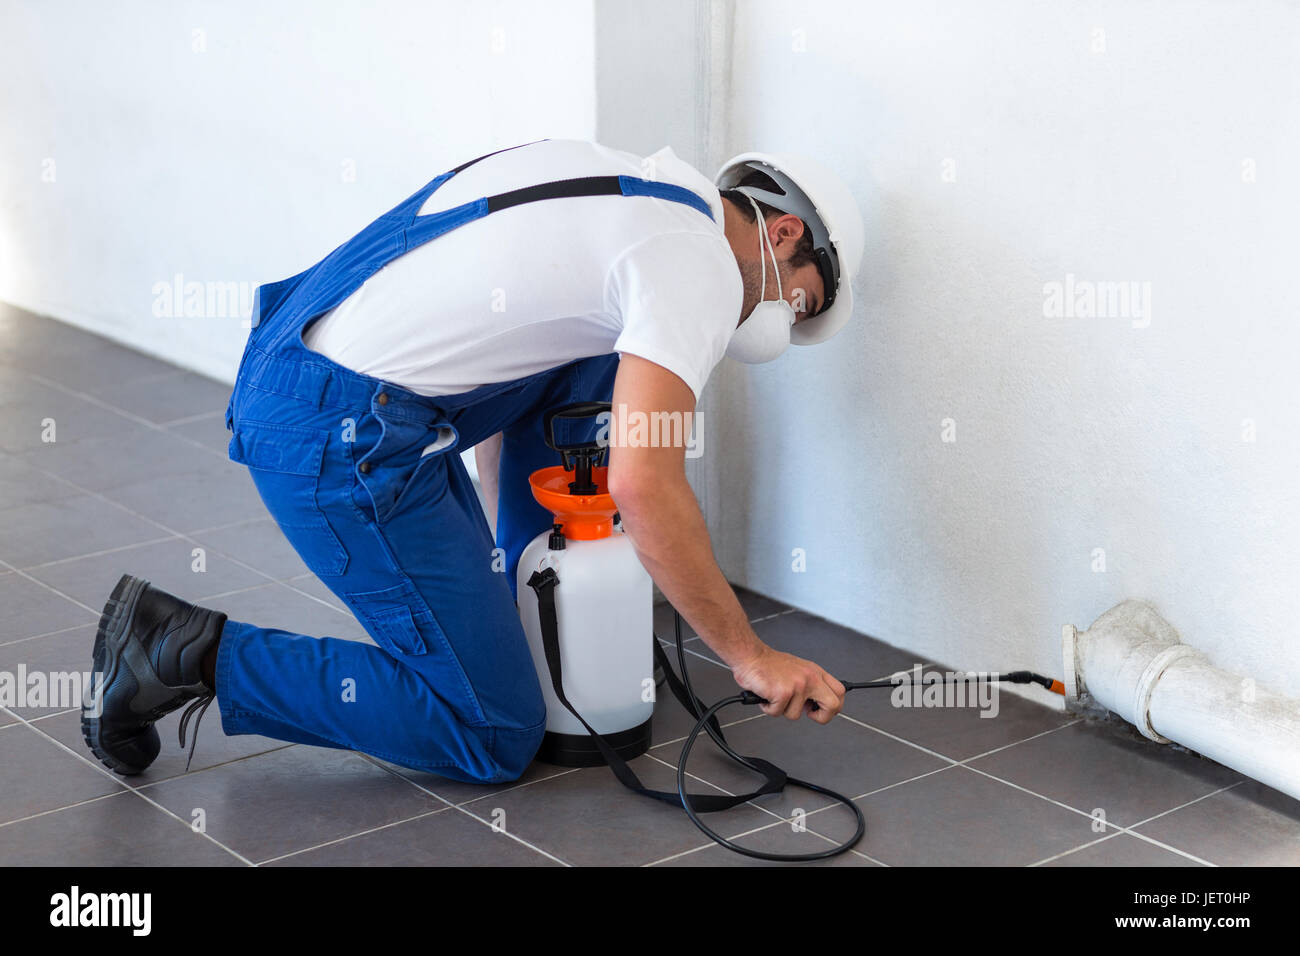 Manual worker spraying insecticide on pipe Stock Photo